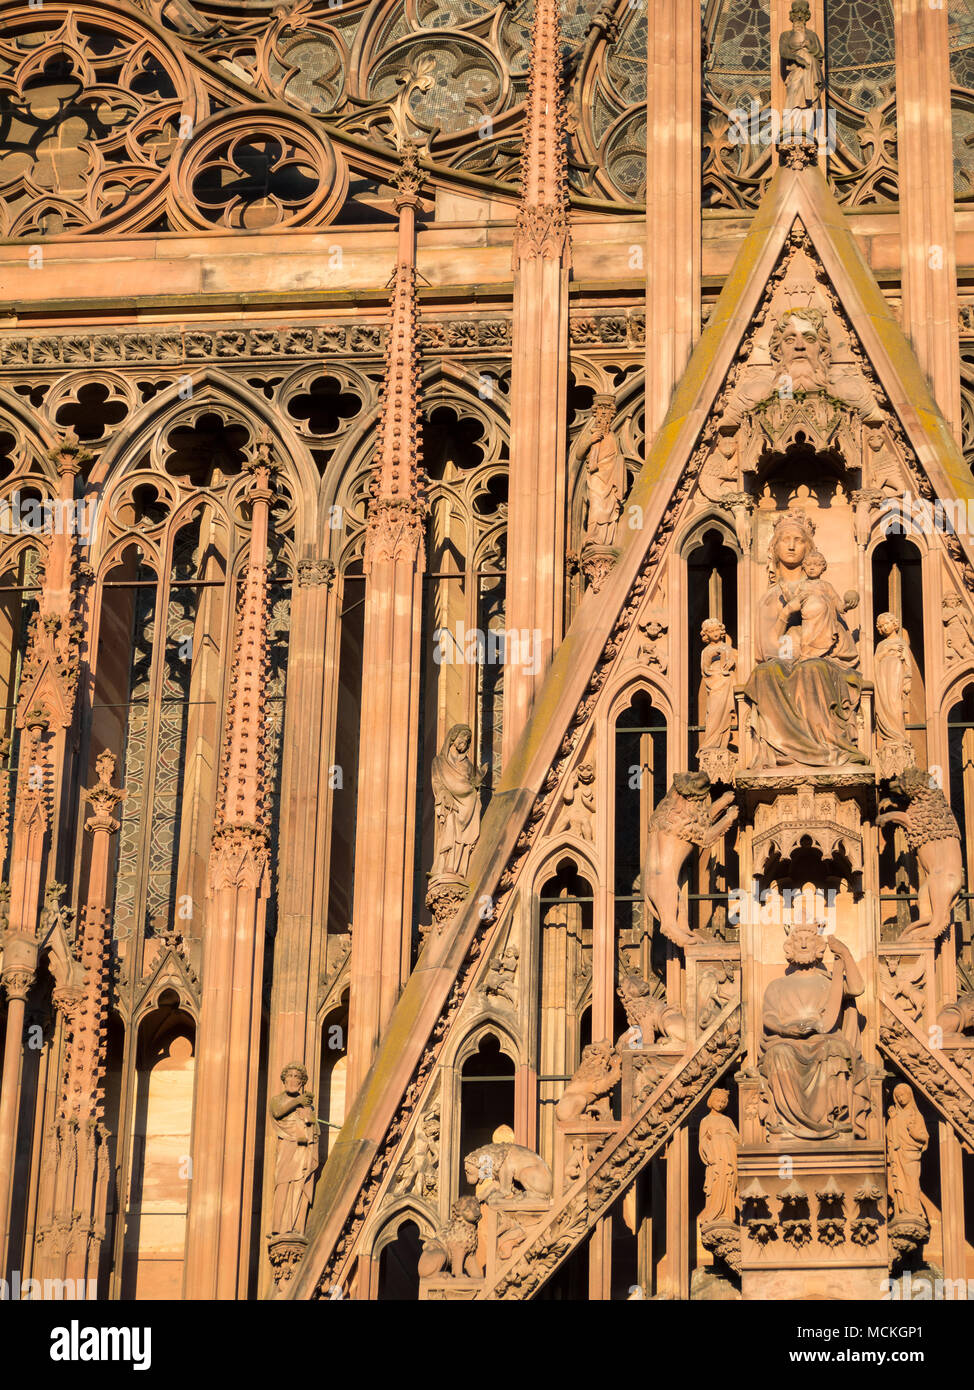 Details of the west facade of the Cathedral of Our Lady of Strasbourg Stock Photo